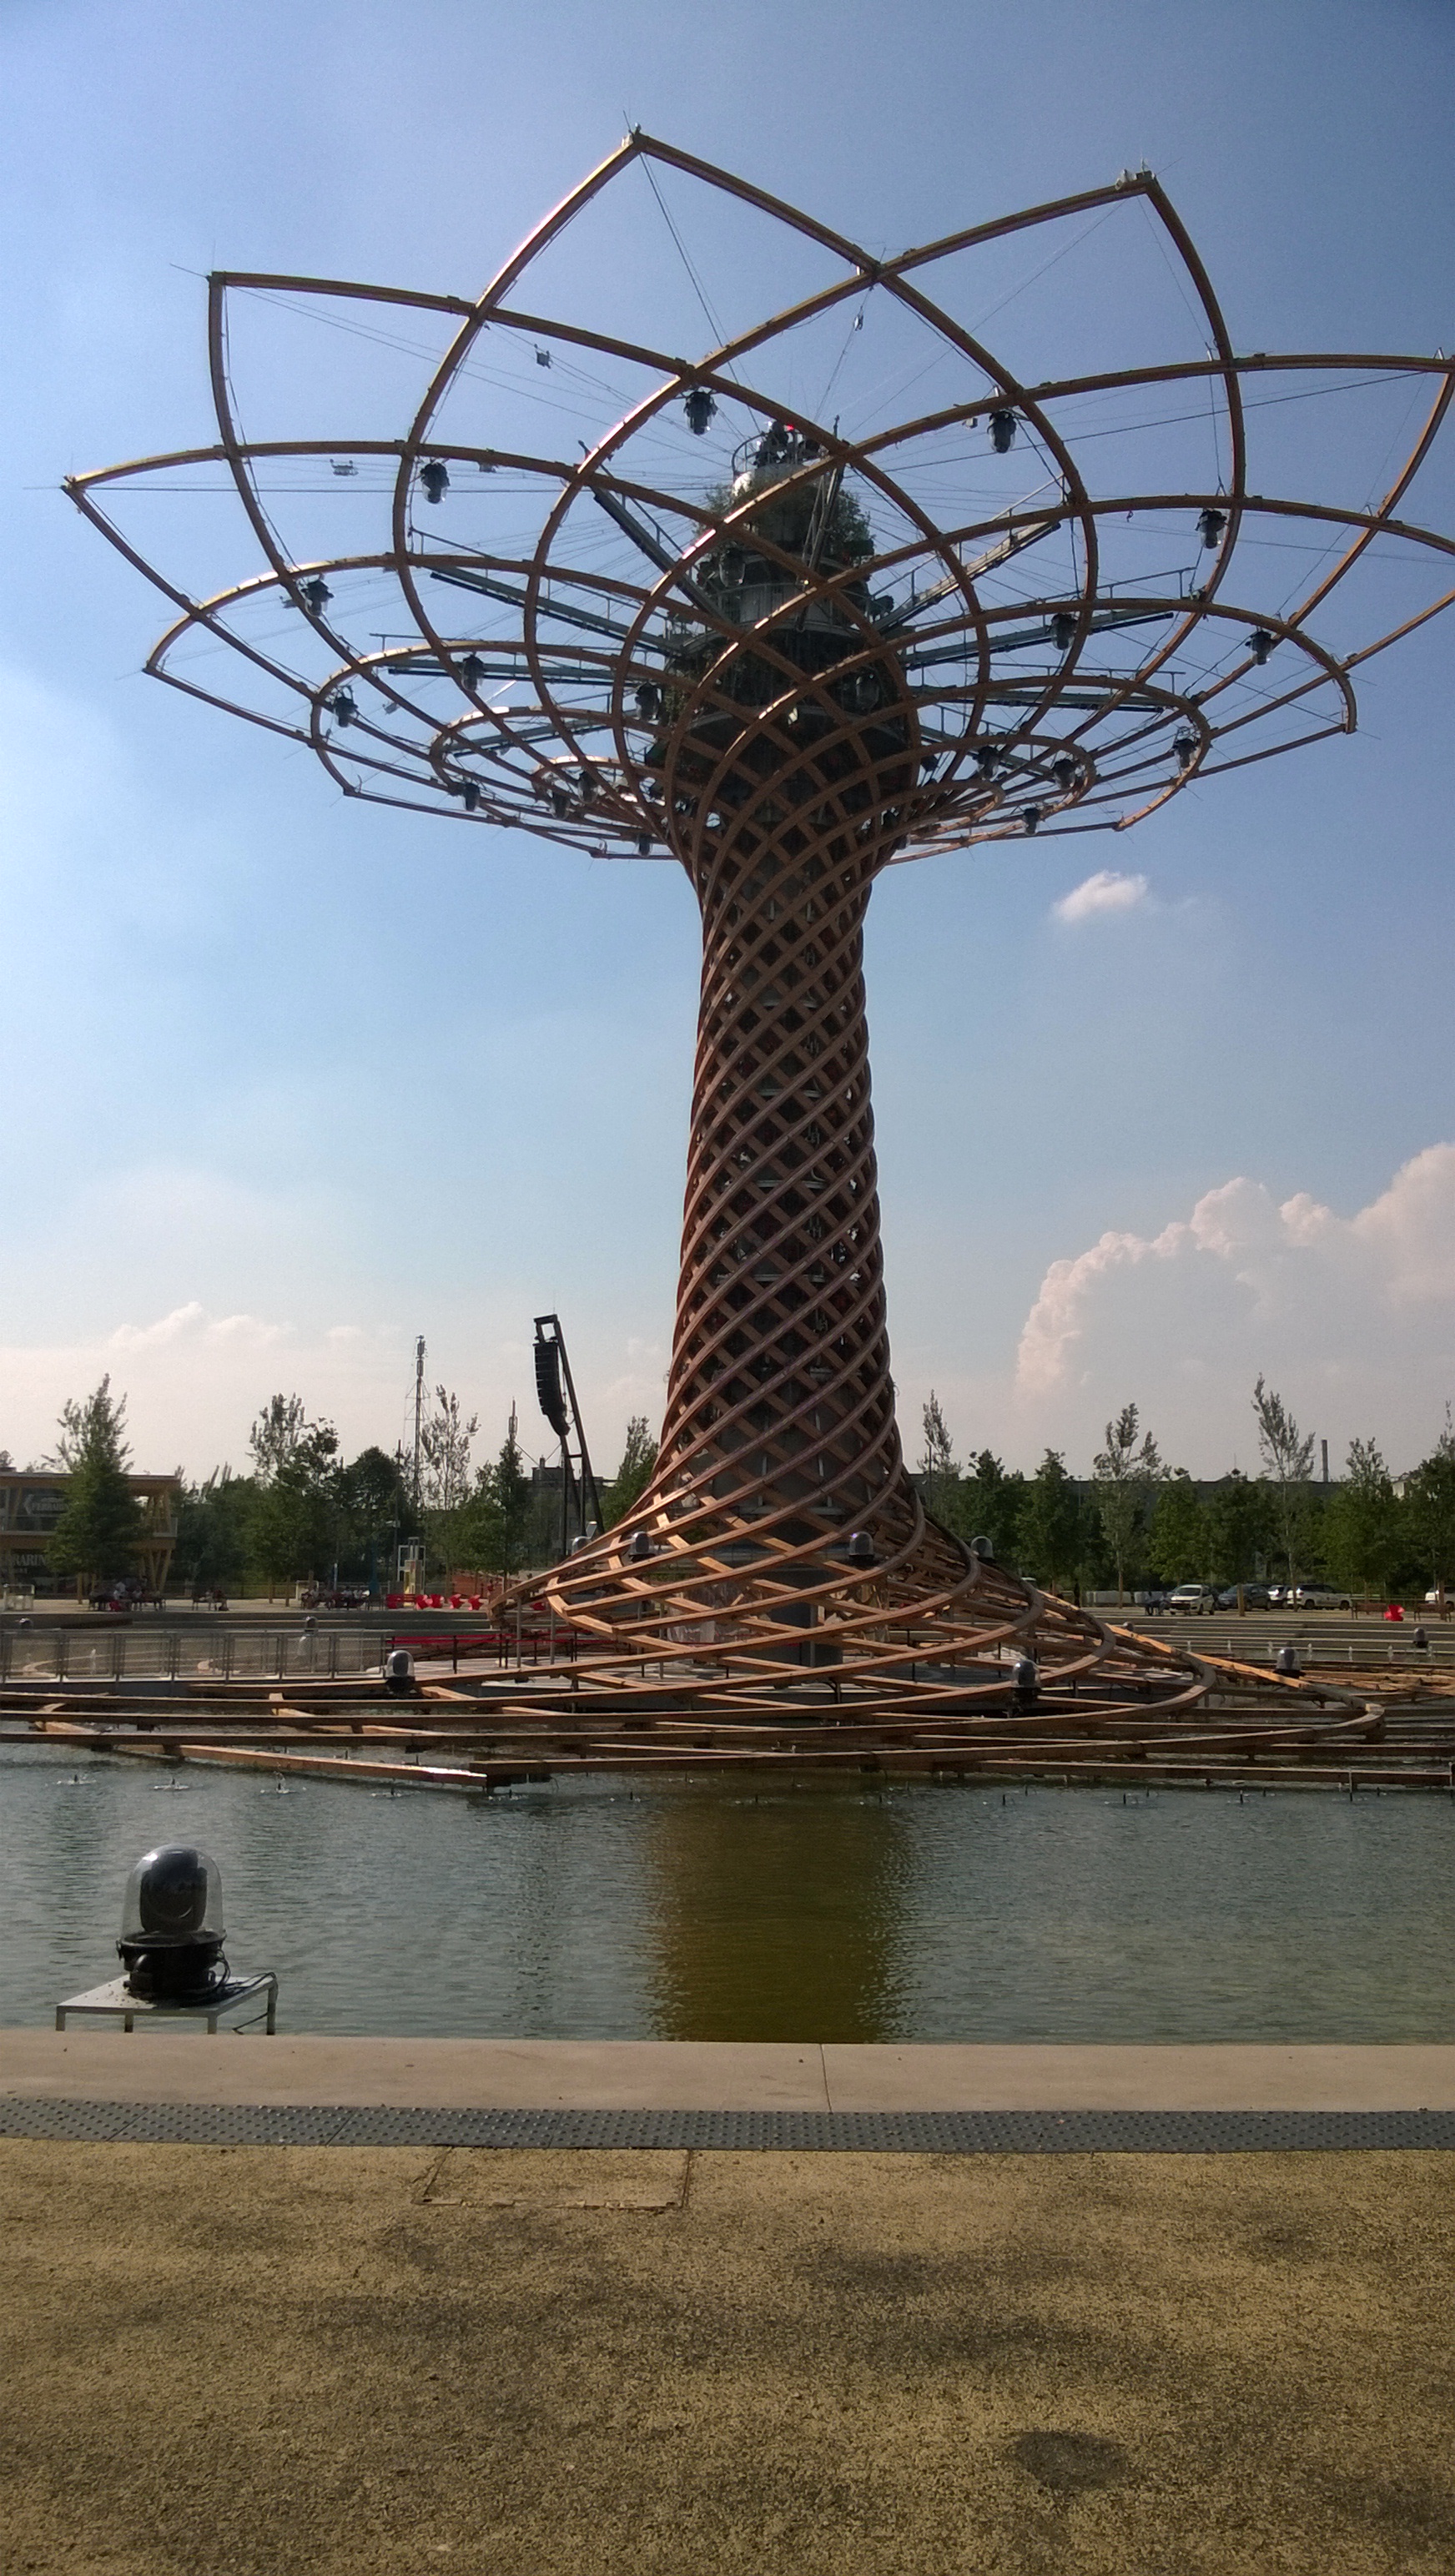 Expo 2015 Wood architecture in Milano, Italy